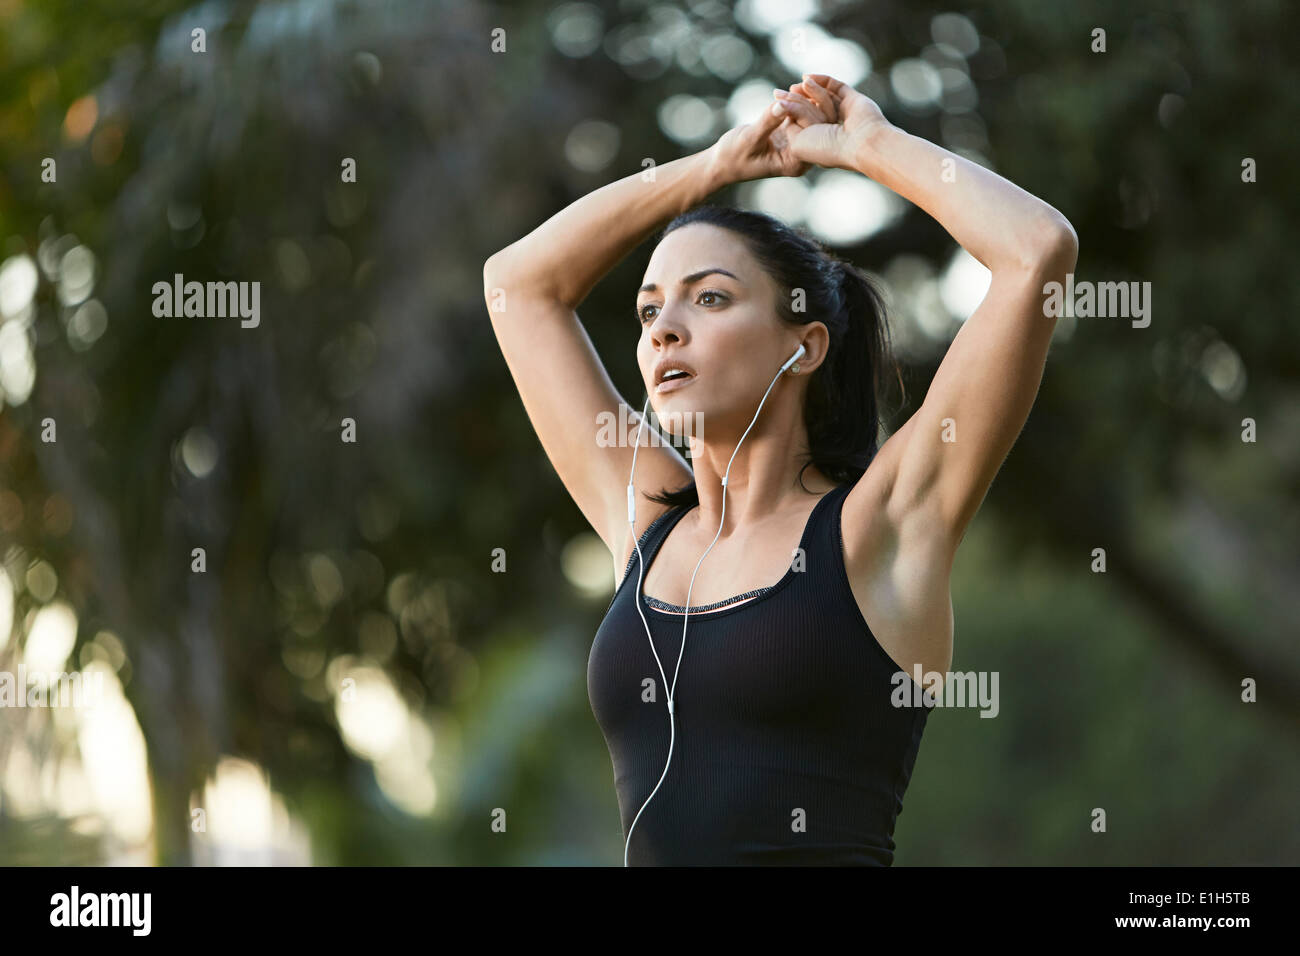 Mid adult woman stretching Stock Photo